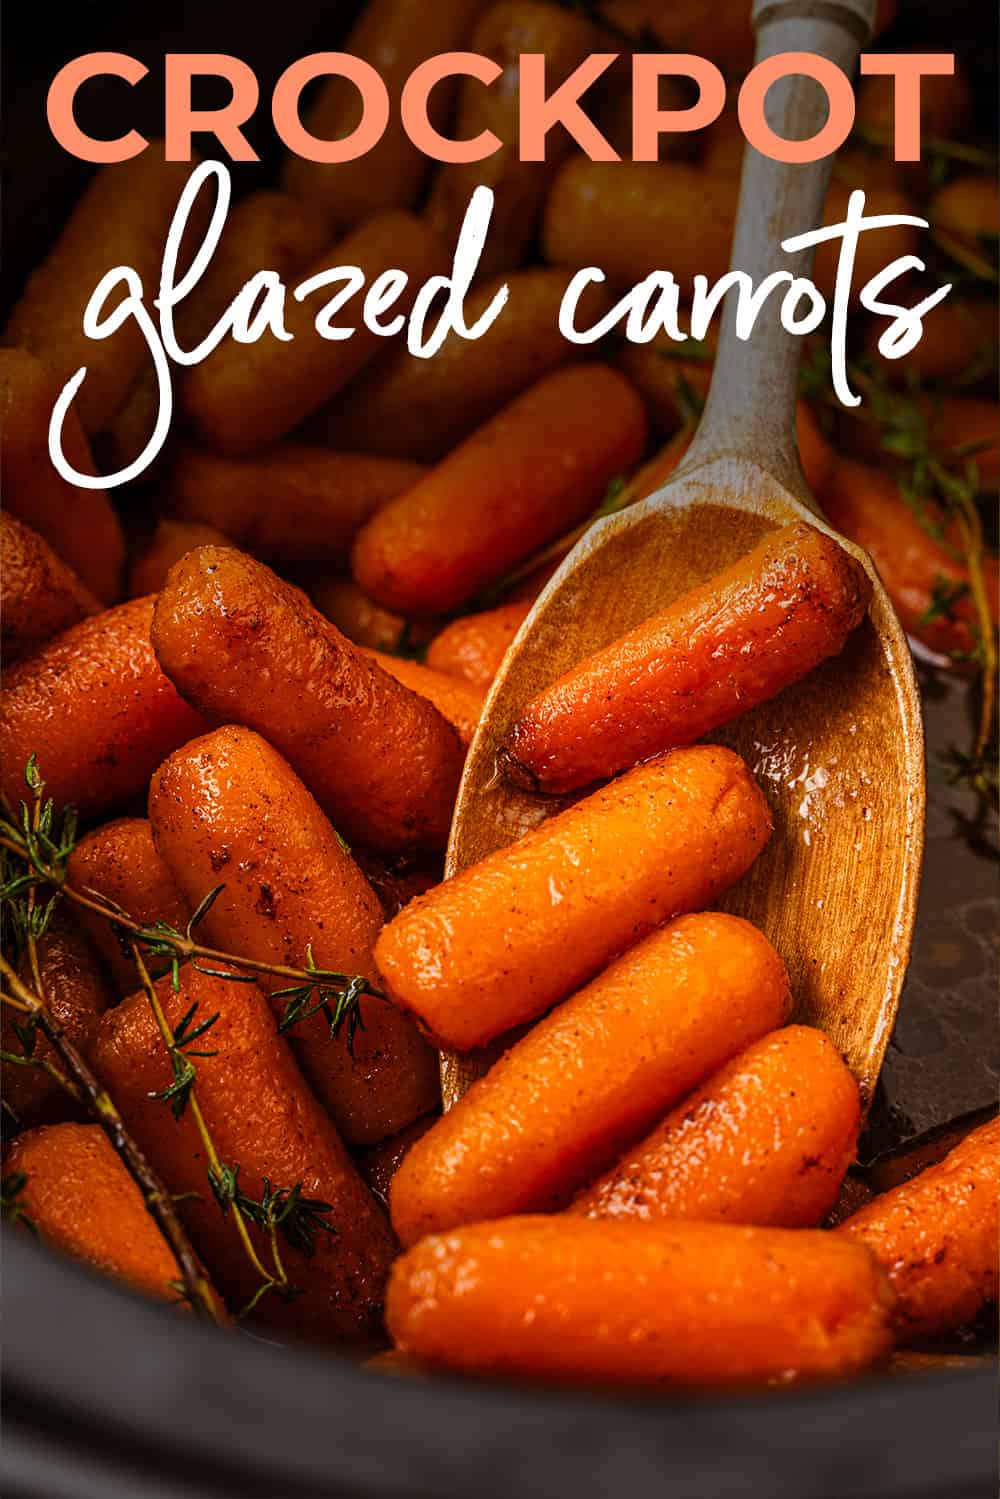 Close up of crockpot carrots on wooden spoon.